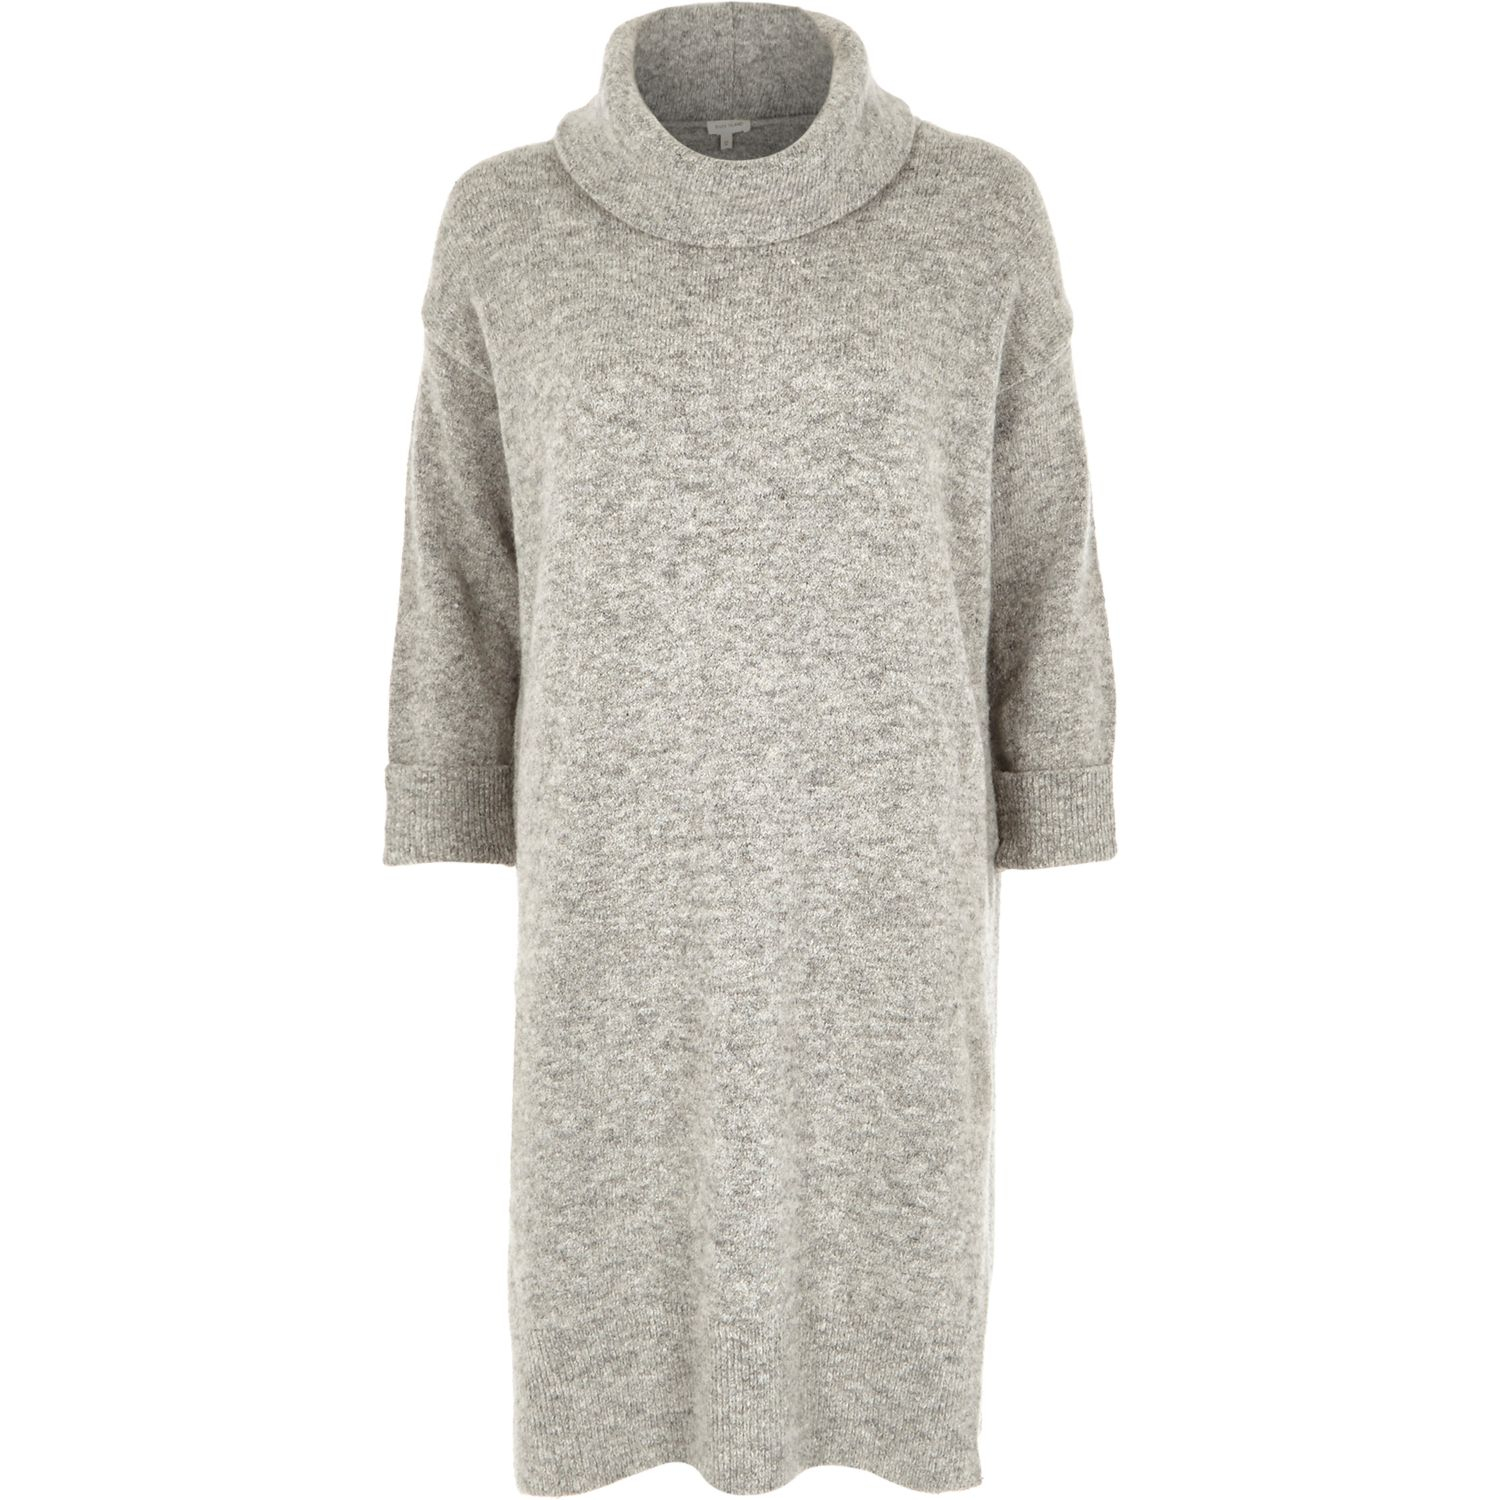 Grey Dress River Island And Review Clothing Brand